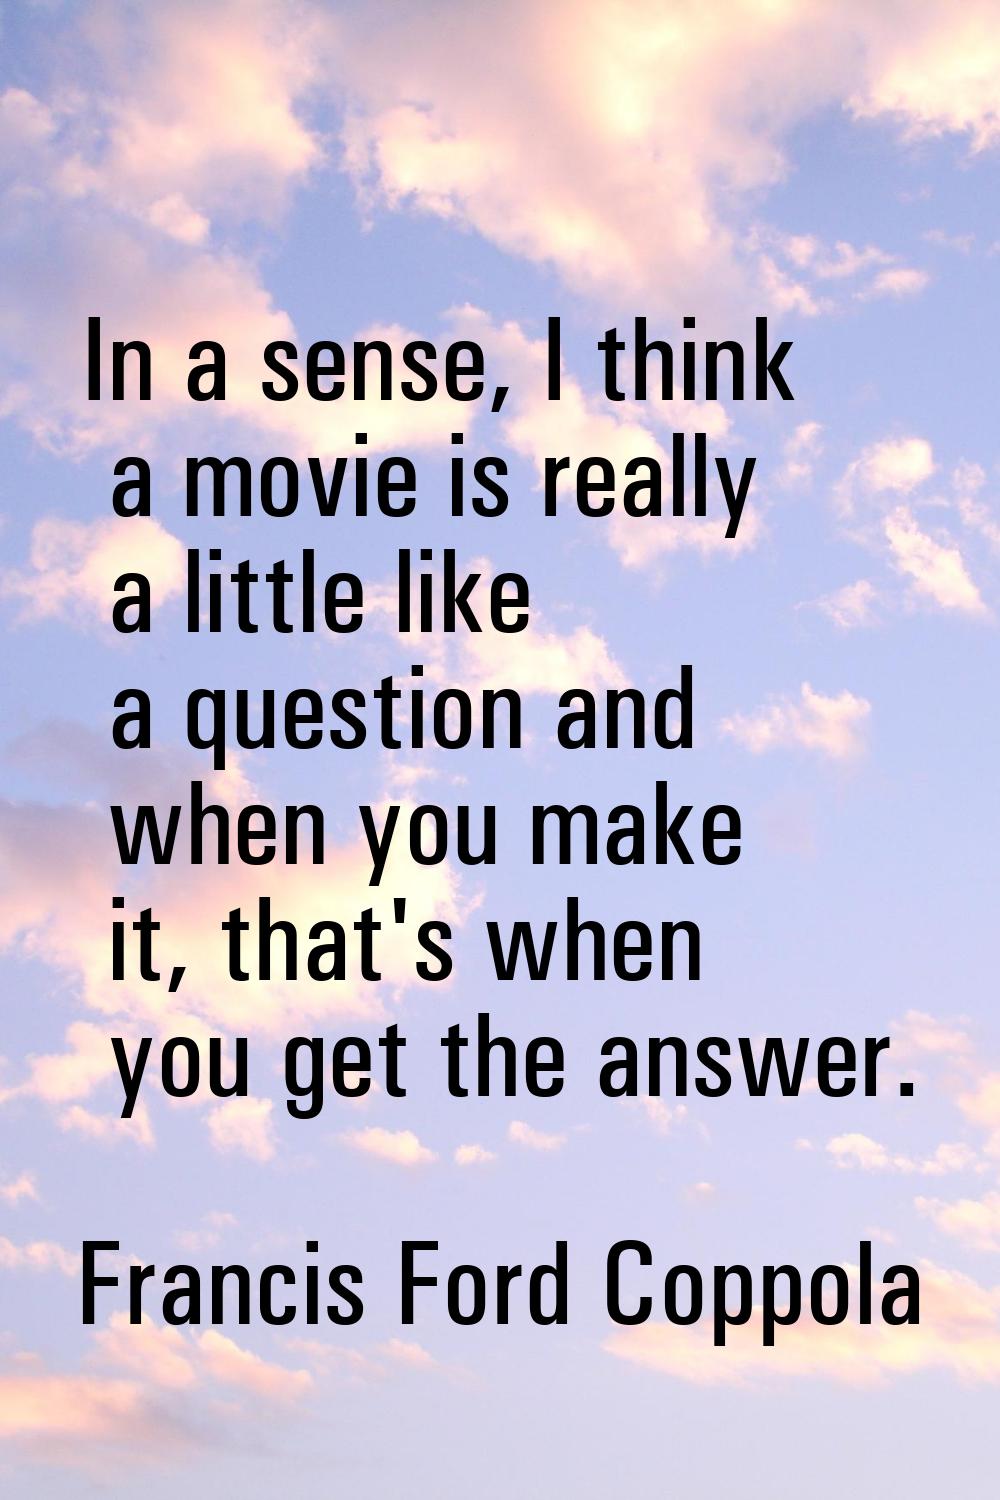 In a sense, I think a movie is really a little like a question and when you make it, that's when yo